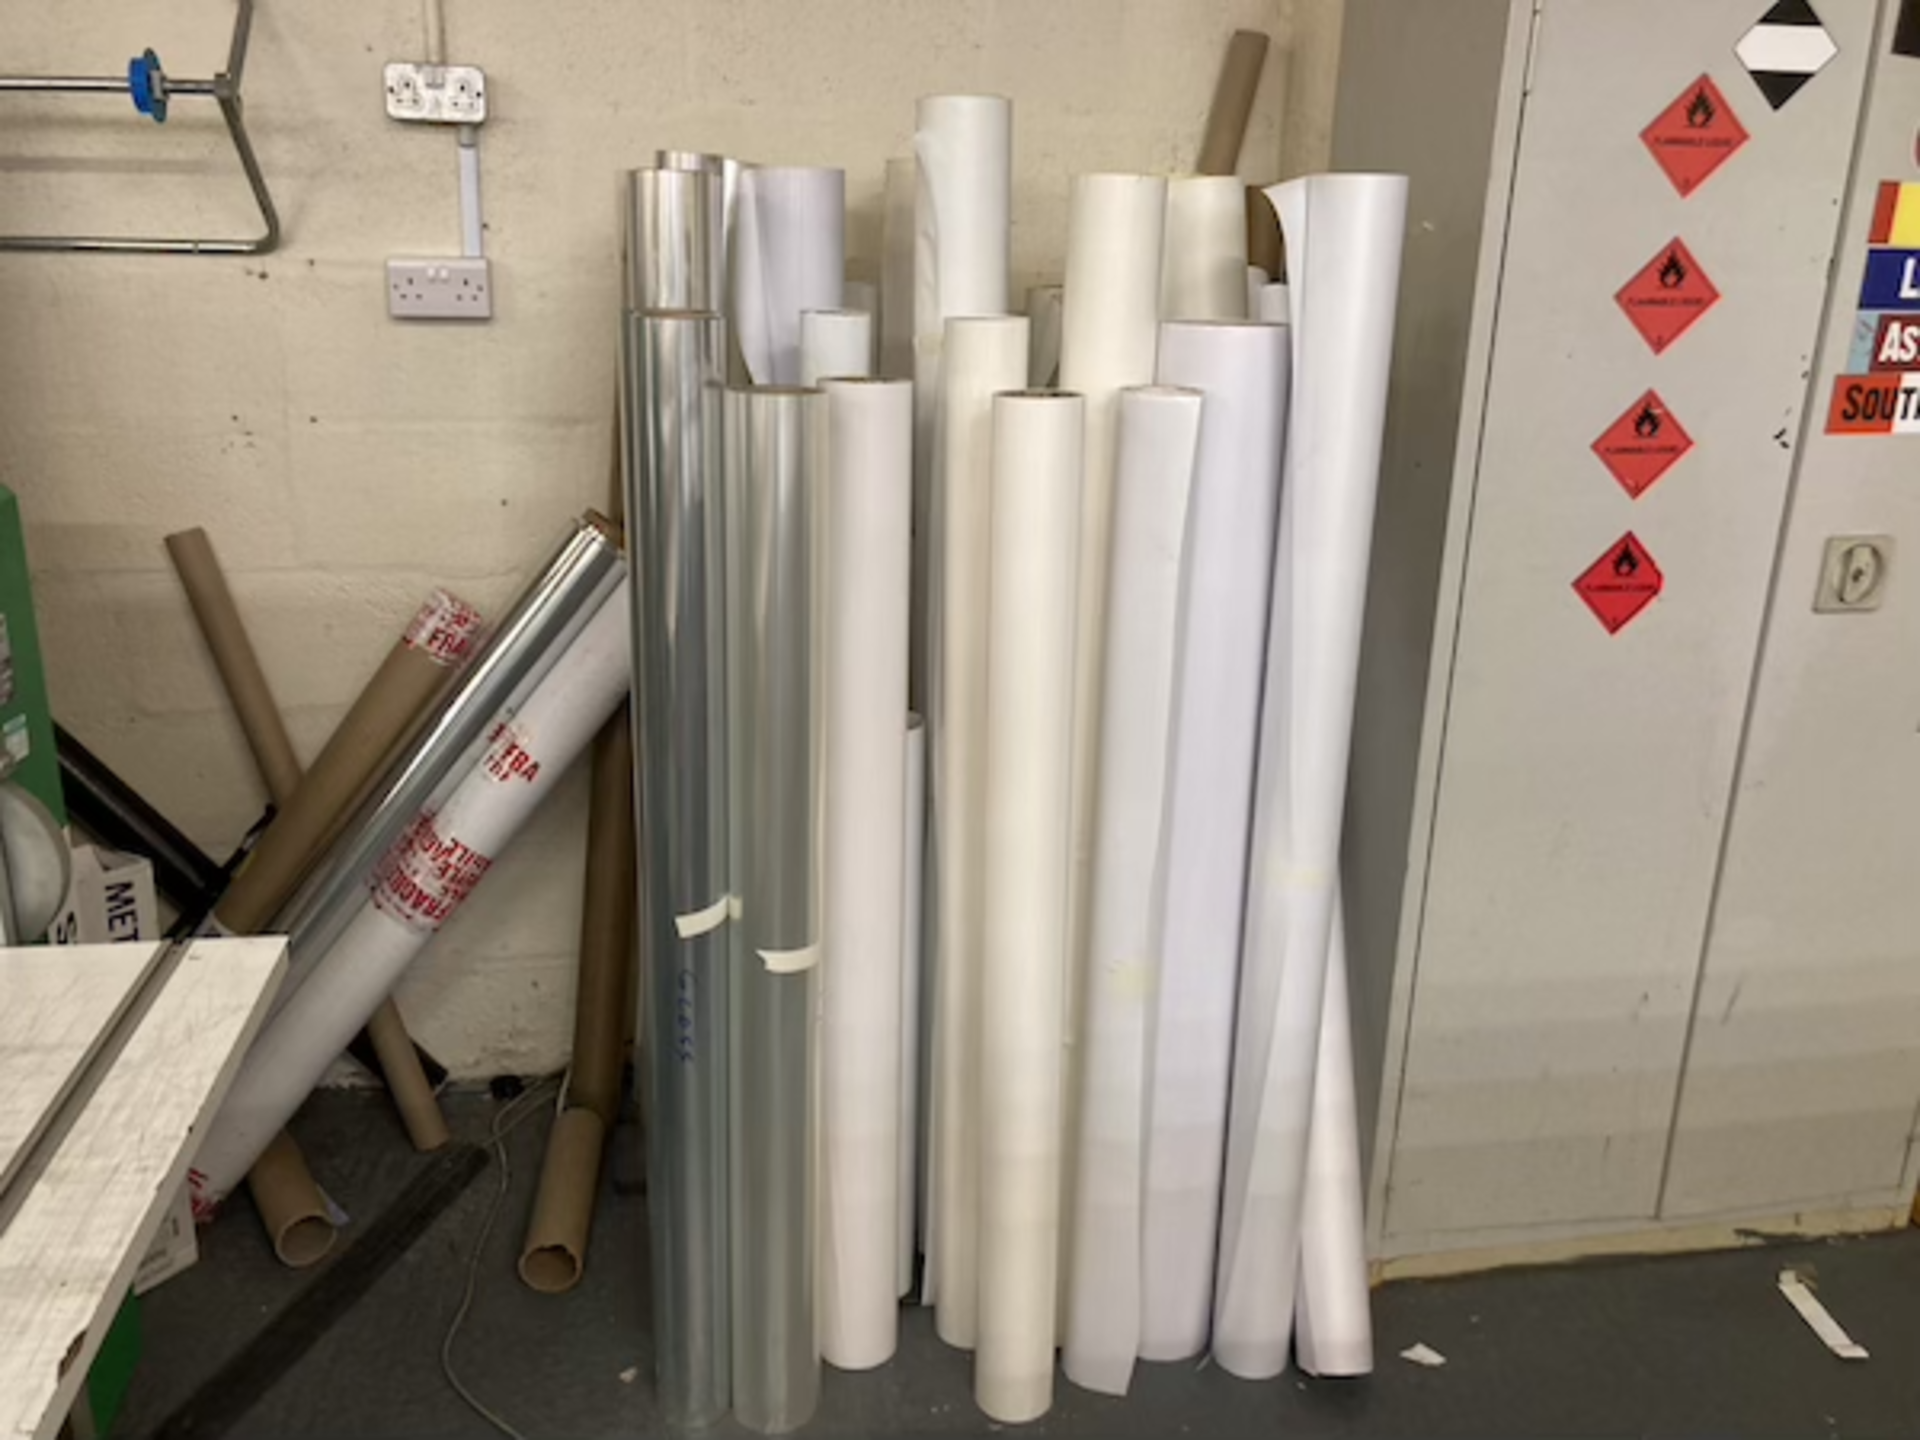 A quantity of white vinyl and paper part rolls, various sizes as lotted